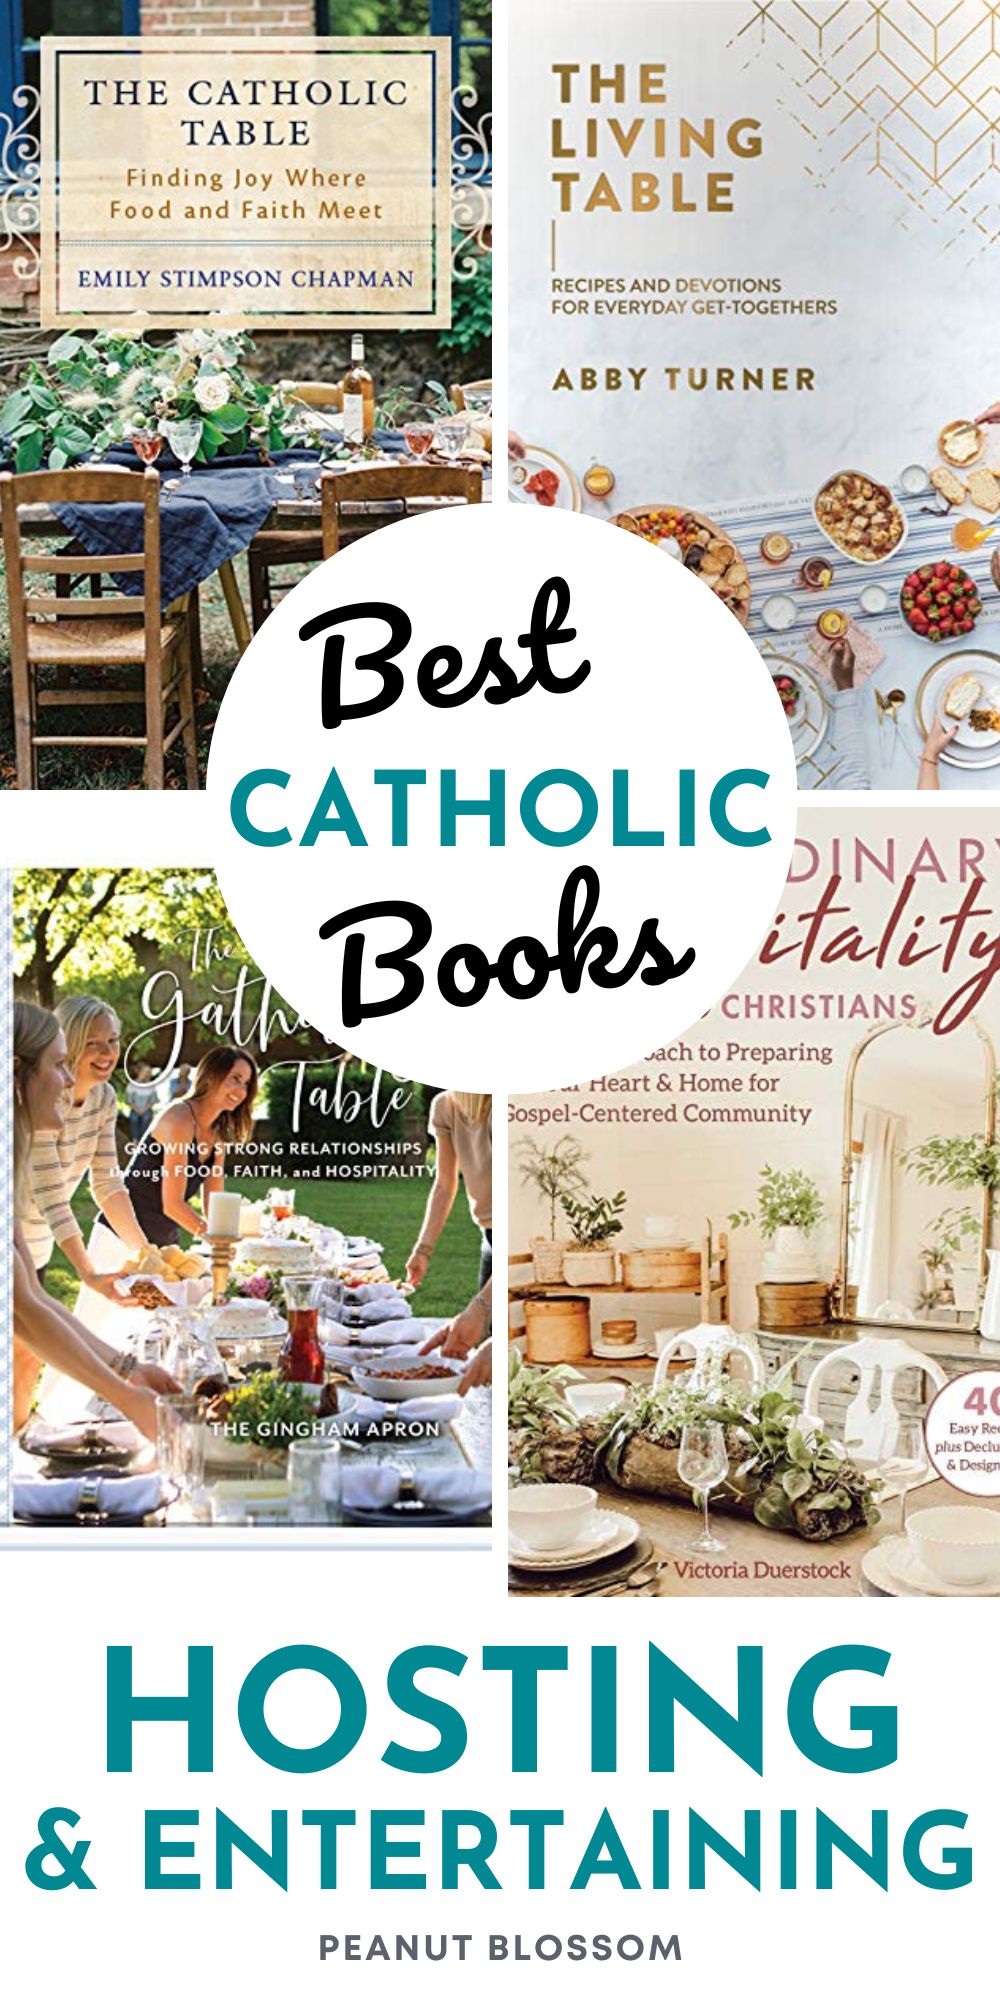 The photo collage shows the best Catholic books for hosting and entertaining.